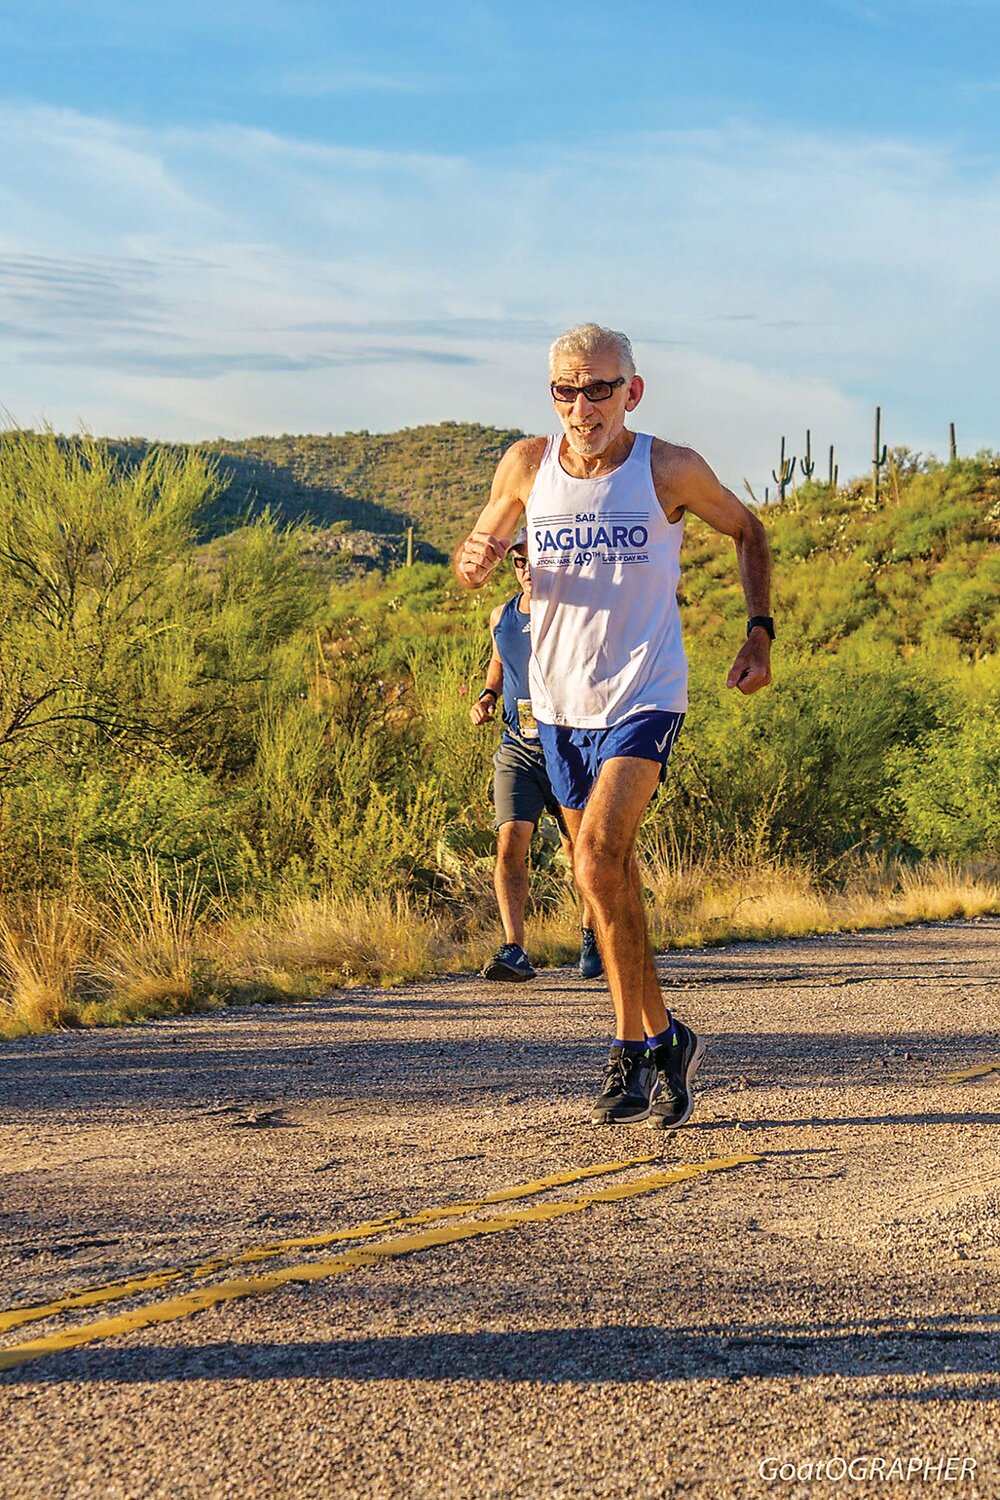 Neil Rosen, a standout on the Bucks County racing scene for decades, recently passed 110,000 career miles while on a run where he now resides in Tucson, Arizona.